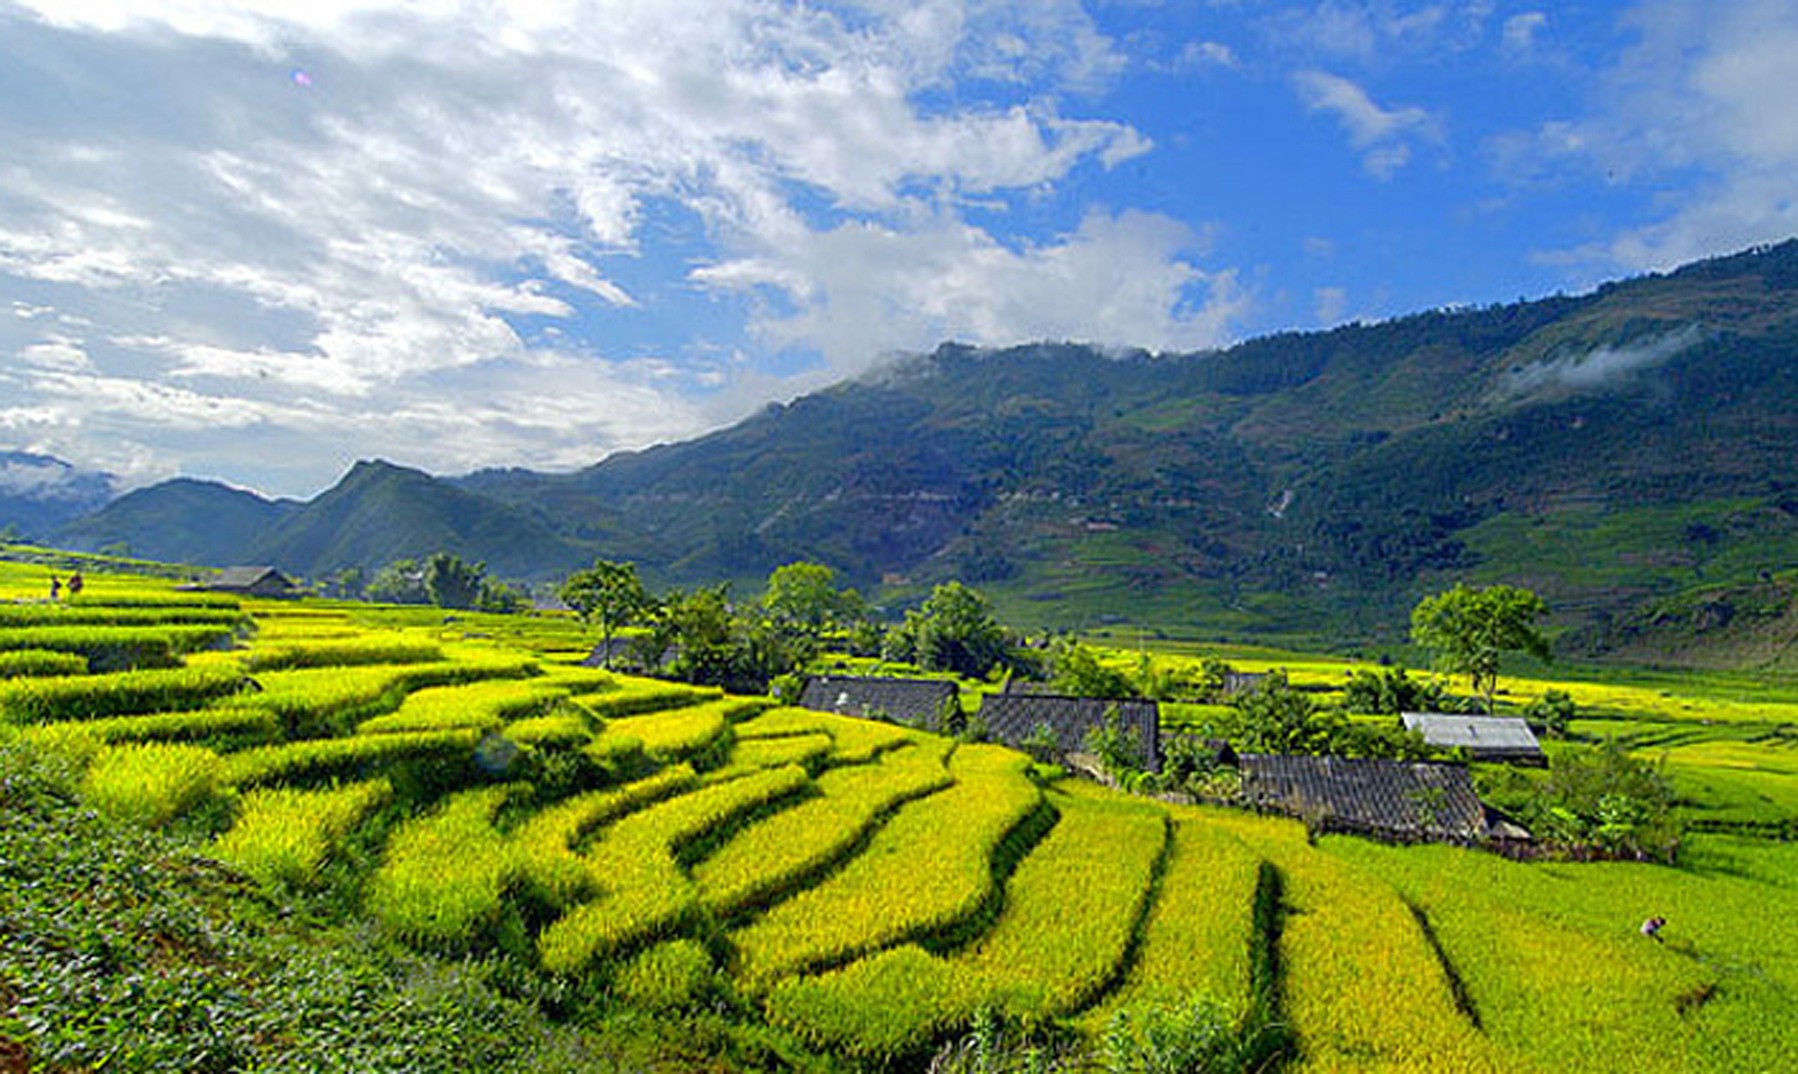 Where to Stay in Sapa